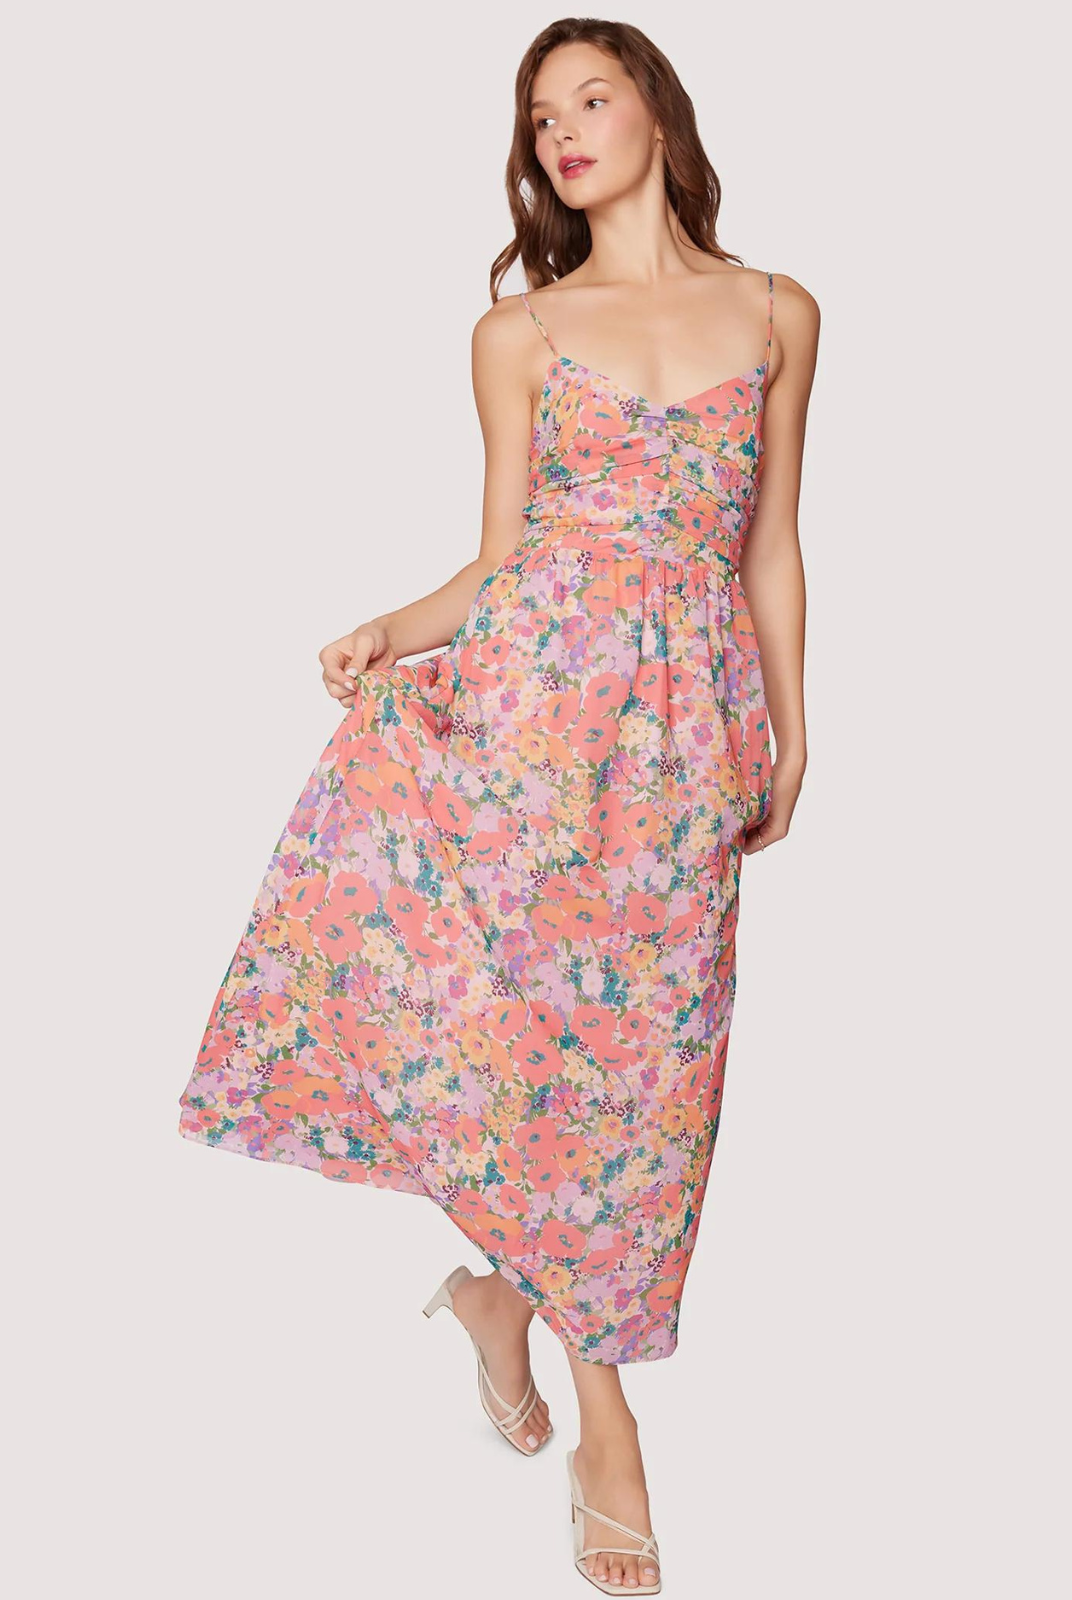 Lost + Wander Floral Bliss Maxi Dress. The Floral Bliss Maxi Dress is perfect for your spring events. With its beautiful floral chiffon print in a pink-peach tone, it exudes a flowy and feminine vibe. Don't worry about forgetting your essentials, as this dress also has a hidden side pocket. The adjustable spaghetti straps allow for a perfect fit.